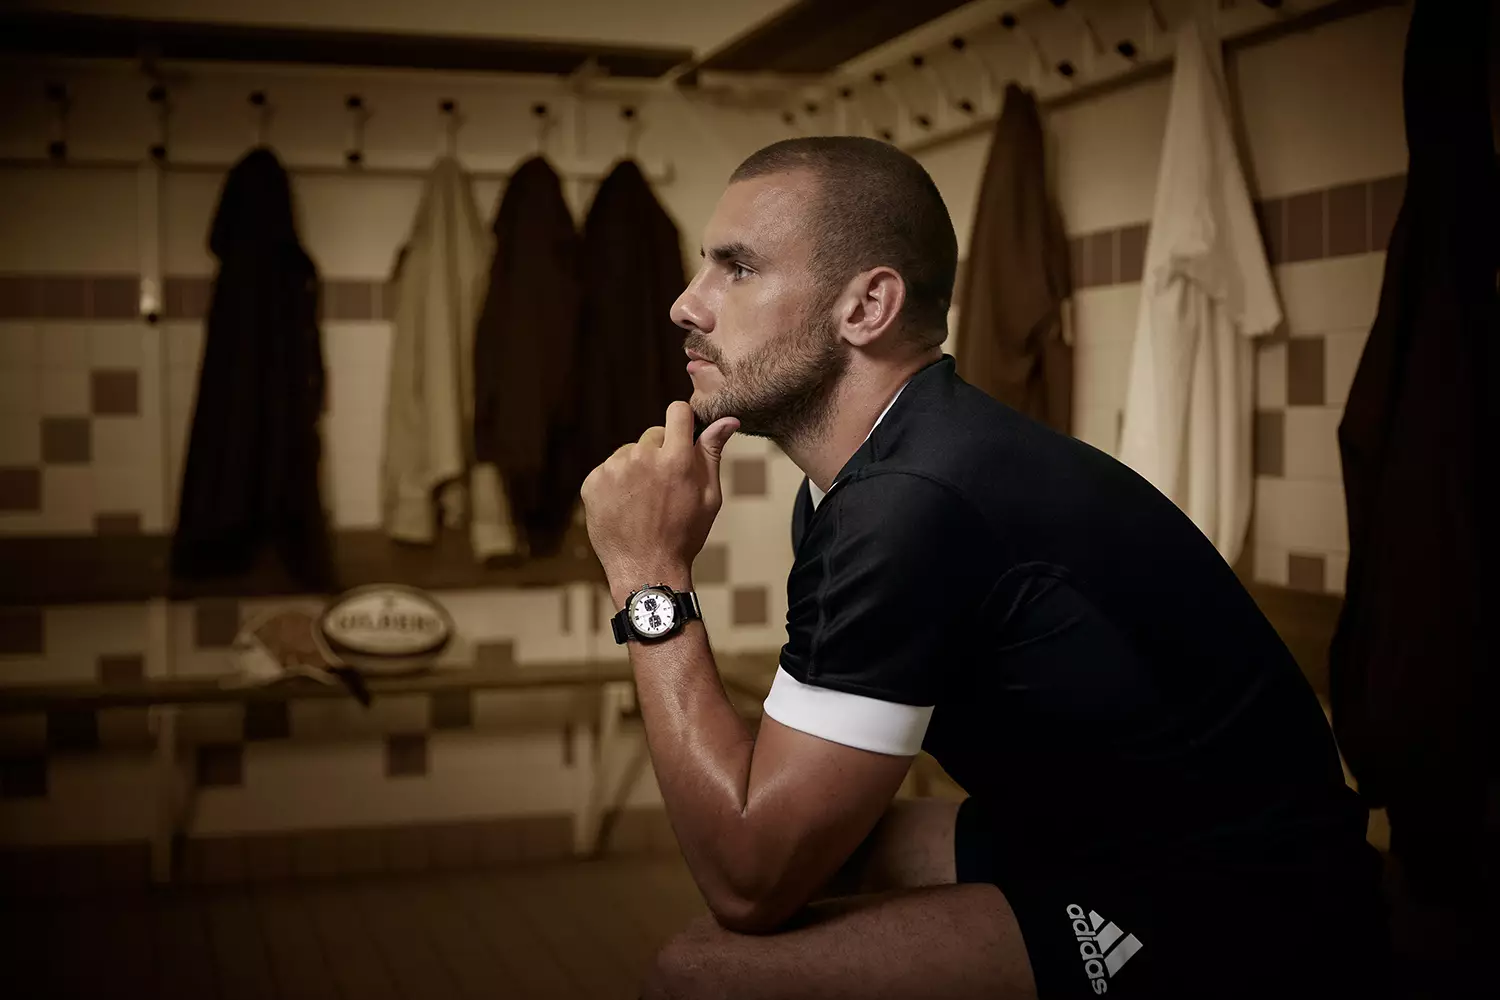 The French watchmaker Briston Appoints The French rugby player Gabin Villière As New Ambassador